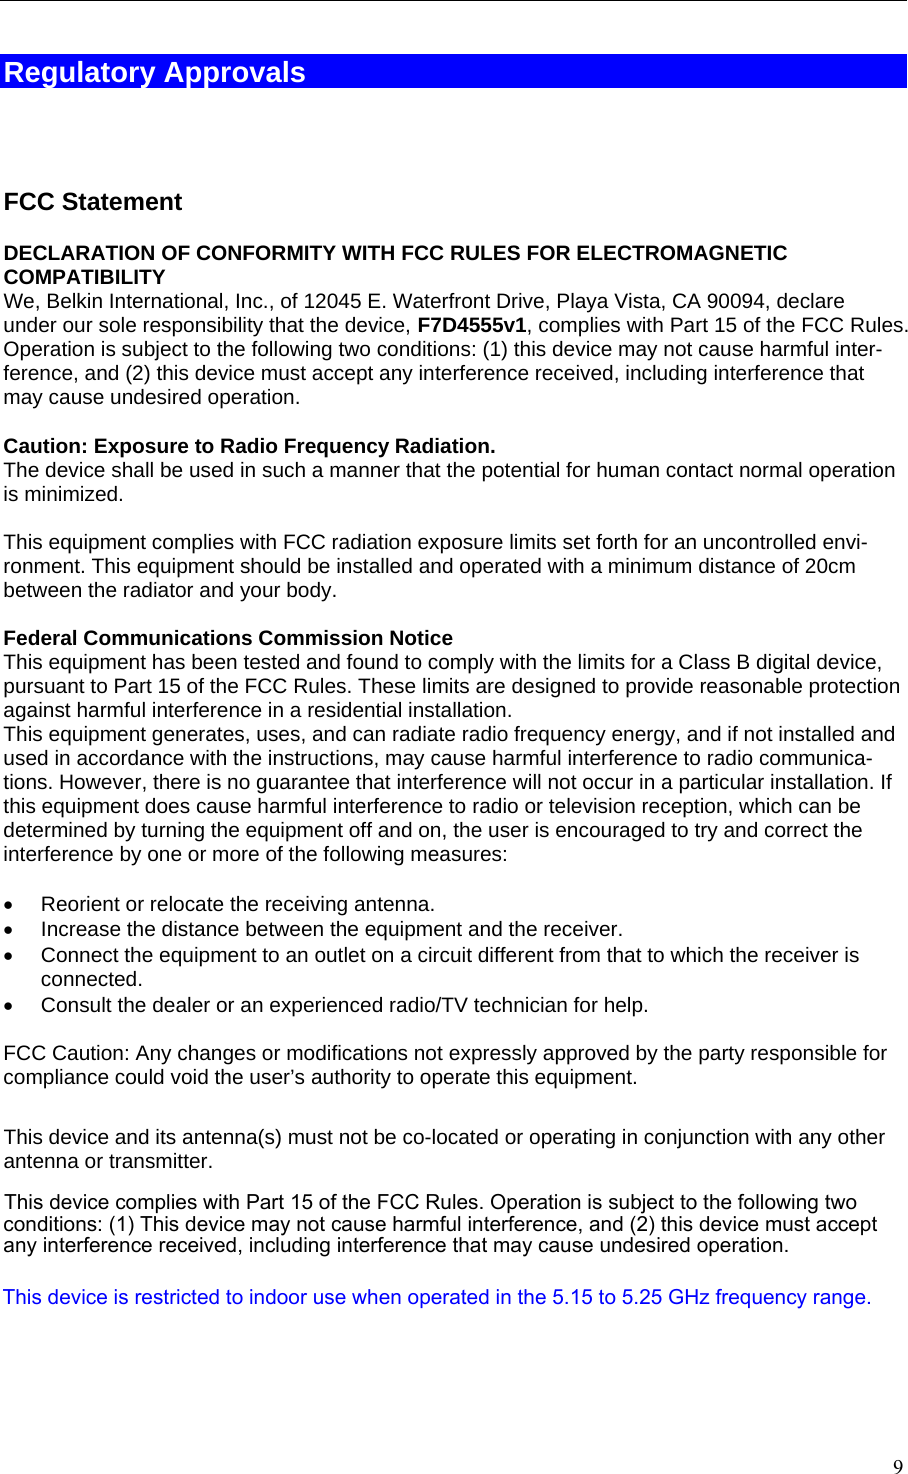   Regulatory Approvals    FCC Statement DECLARATION OF CONFORMITY WITH FCC RULES FOR ELECTROMAGNETIC COMPATIBILITYWe, Belkin International, Inc., of 12045 E. Waterfront Drive, Playa Vista, CA 90094, declare under our sole responsibility that the device, F7D4555v1, complies with Part 15 of the FCC Rules. Operation is subject to the following two conditions: (1) this device may not cause harmful inter-ference, and (2) this device must accept any interference received, including interference that may cause undesired operation.  Caution: Exposure to Radio Frequency Radiation.  The device shall be used in such a manner that the potential for human contact normal operation is minimized.  This equipment complies with FCC radiation exposure limits set forth for an uncontrolled envi-ronment. This equipment should be installed and operated with a minimum distance of 20cm between the radiator and your body.  Federal Communications Commission Notice  This equipment has been tested and found to comply with the limits for a Class B digital device, pursuant to Part 15 of the FCC Rules. These limits are designed to provide reasonable protection against harmful interference in a residential installation. This equipment generates, uses, and can radiate radio frequency energy, and if not installed and used in accordance with the instructions, may cause harmful interference to radio communica-tions. However, there is no guarantee that interference will not occur in a particular installation. If this equipment does cause harmful interference to radio or television reception, which can be determined by turning the equipment off and on, the user is encouraged to try and correct the interference by one or more of the following measures:  •  Reorient or relocate the receiving antenna.  •  Increase the distance between the equipment and the receiver.  •  Connect the equipment to an outlet on a circuit different from that to which the receiver is connected.  •  Consult the dealer or an experienced radio/TV technician for help.  FCC Caution: Any changes or modifications not expressly approved by the party responsible for compliance could void the user’s authority to operate this equipment.   This device and its antenna(s) must not be co-located or operating in conjunction with any other antenna or transmitter.    9 This device complies with Part 15 of the FCC Rules. Operation is subject to the following two  conditions: (1) This device may not cause harmful interference, and (2) this device must accept  any interference received, including interference that may cause undesired operation.This device is restricted to indoor use when operated in the 5.15 to 5.25 GHz frequency range.